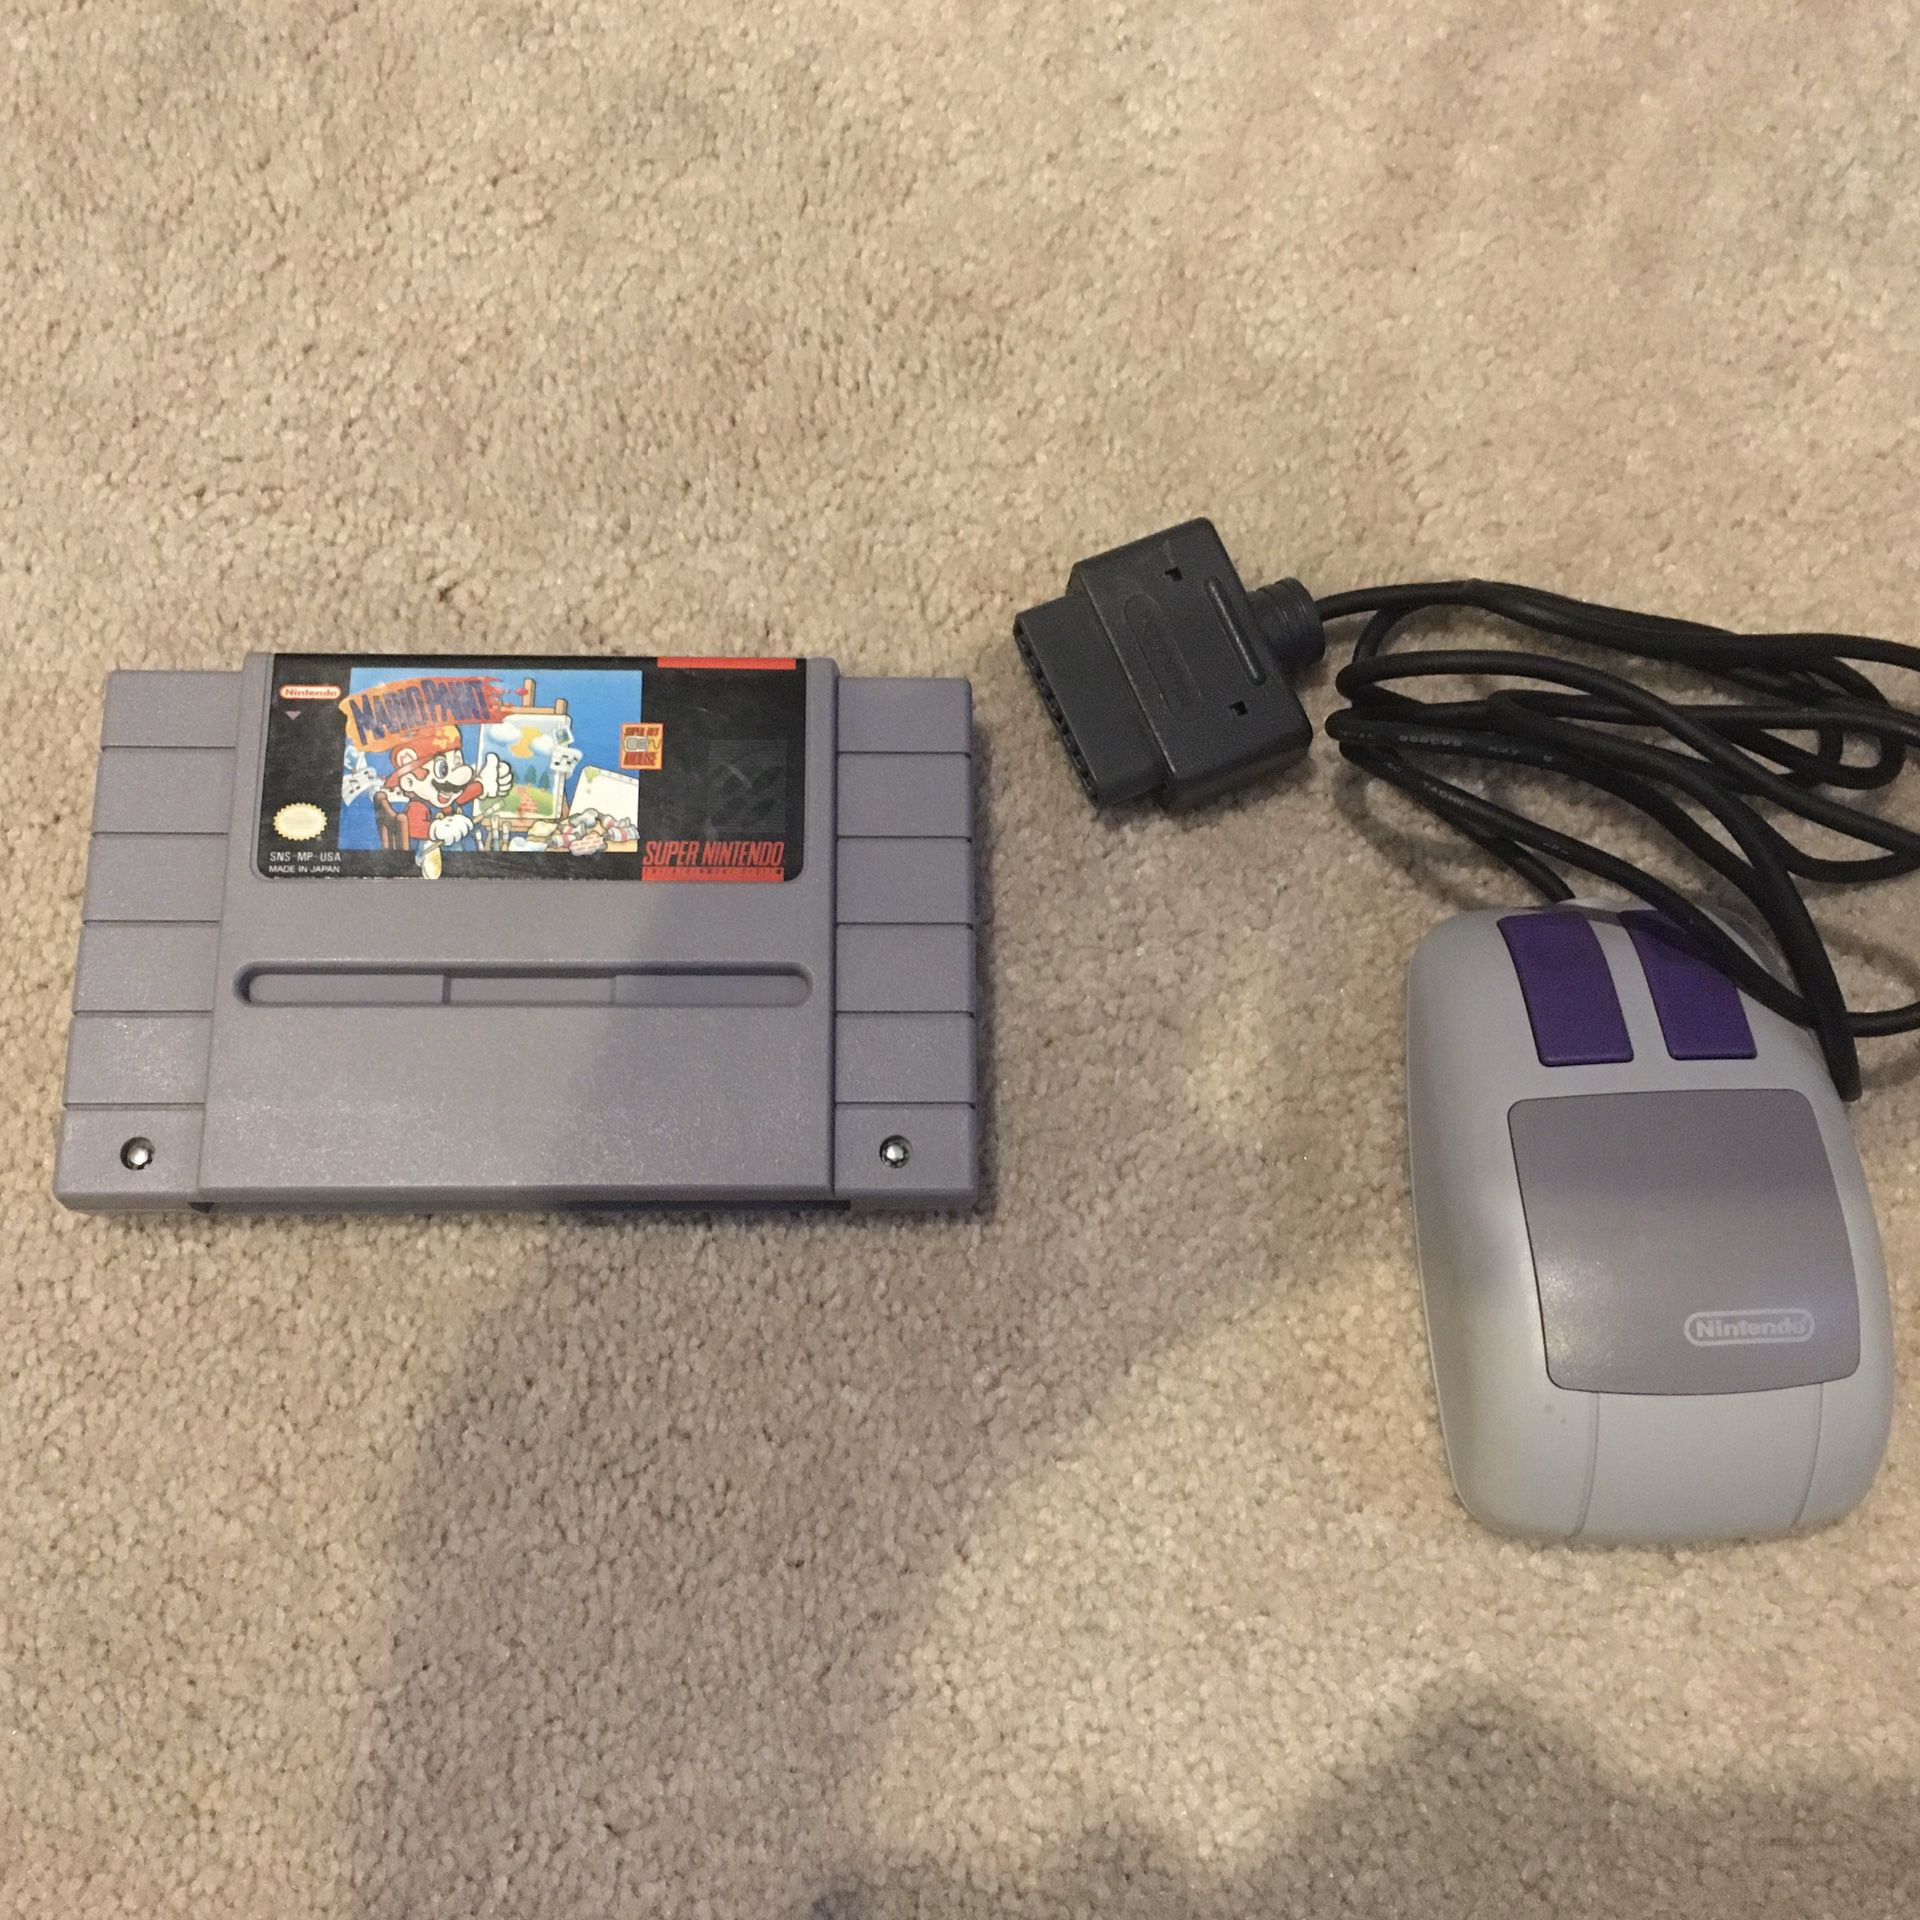 Mario Paint + Mouse for Nintendo SNES